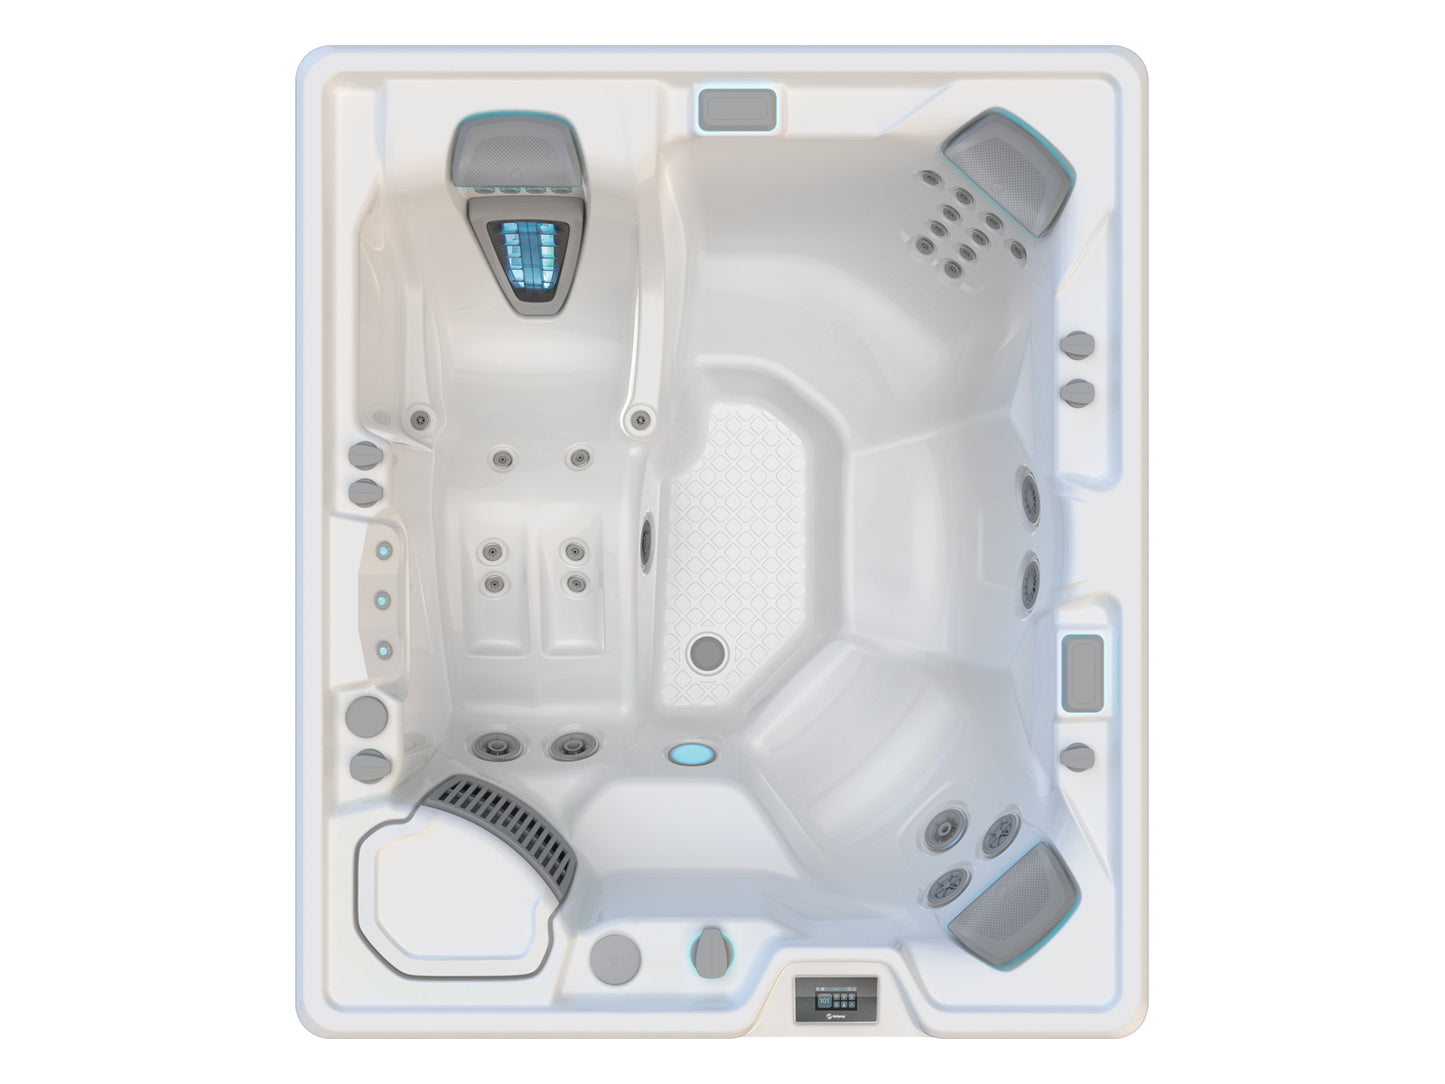 Sovereign Spa Hot Tub, 5 Seats Lounge, SaltWater System